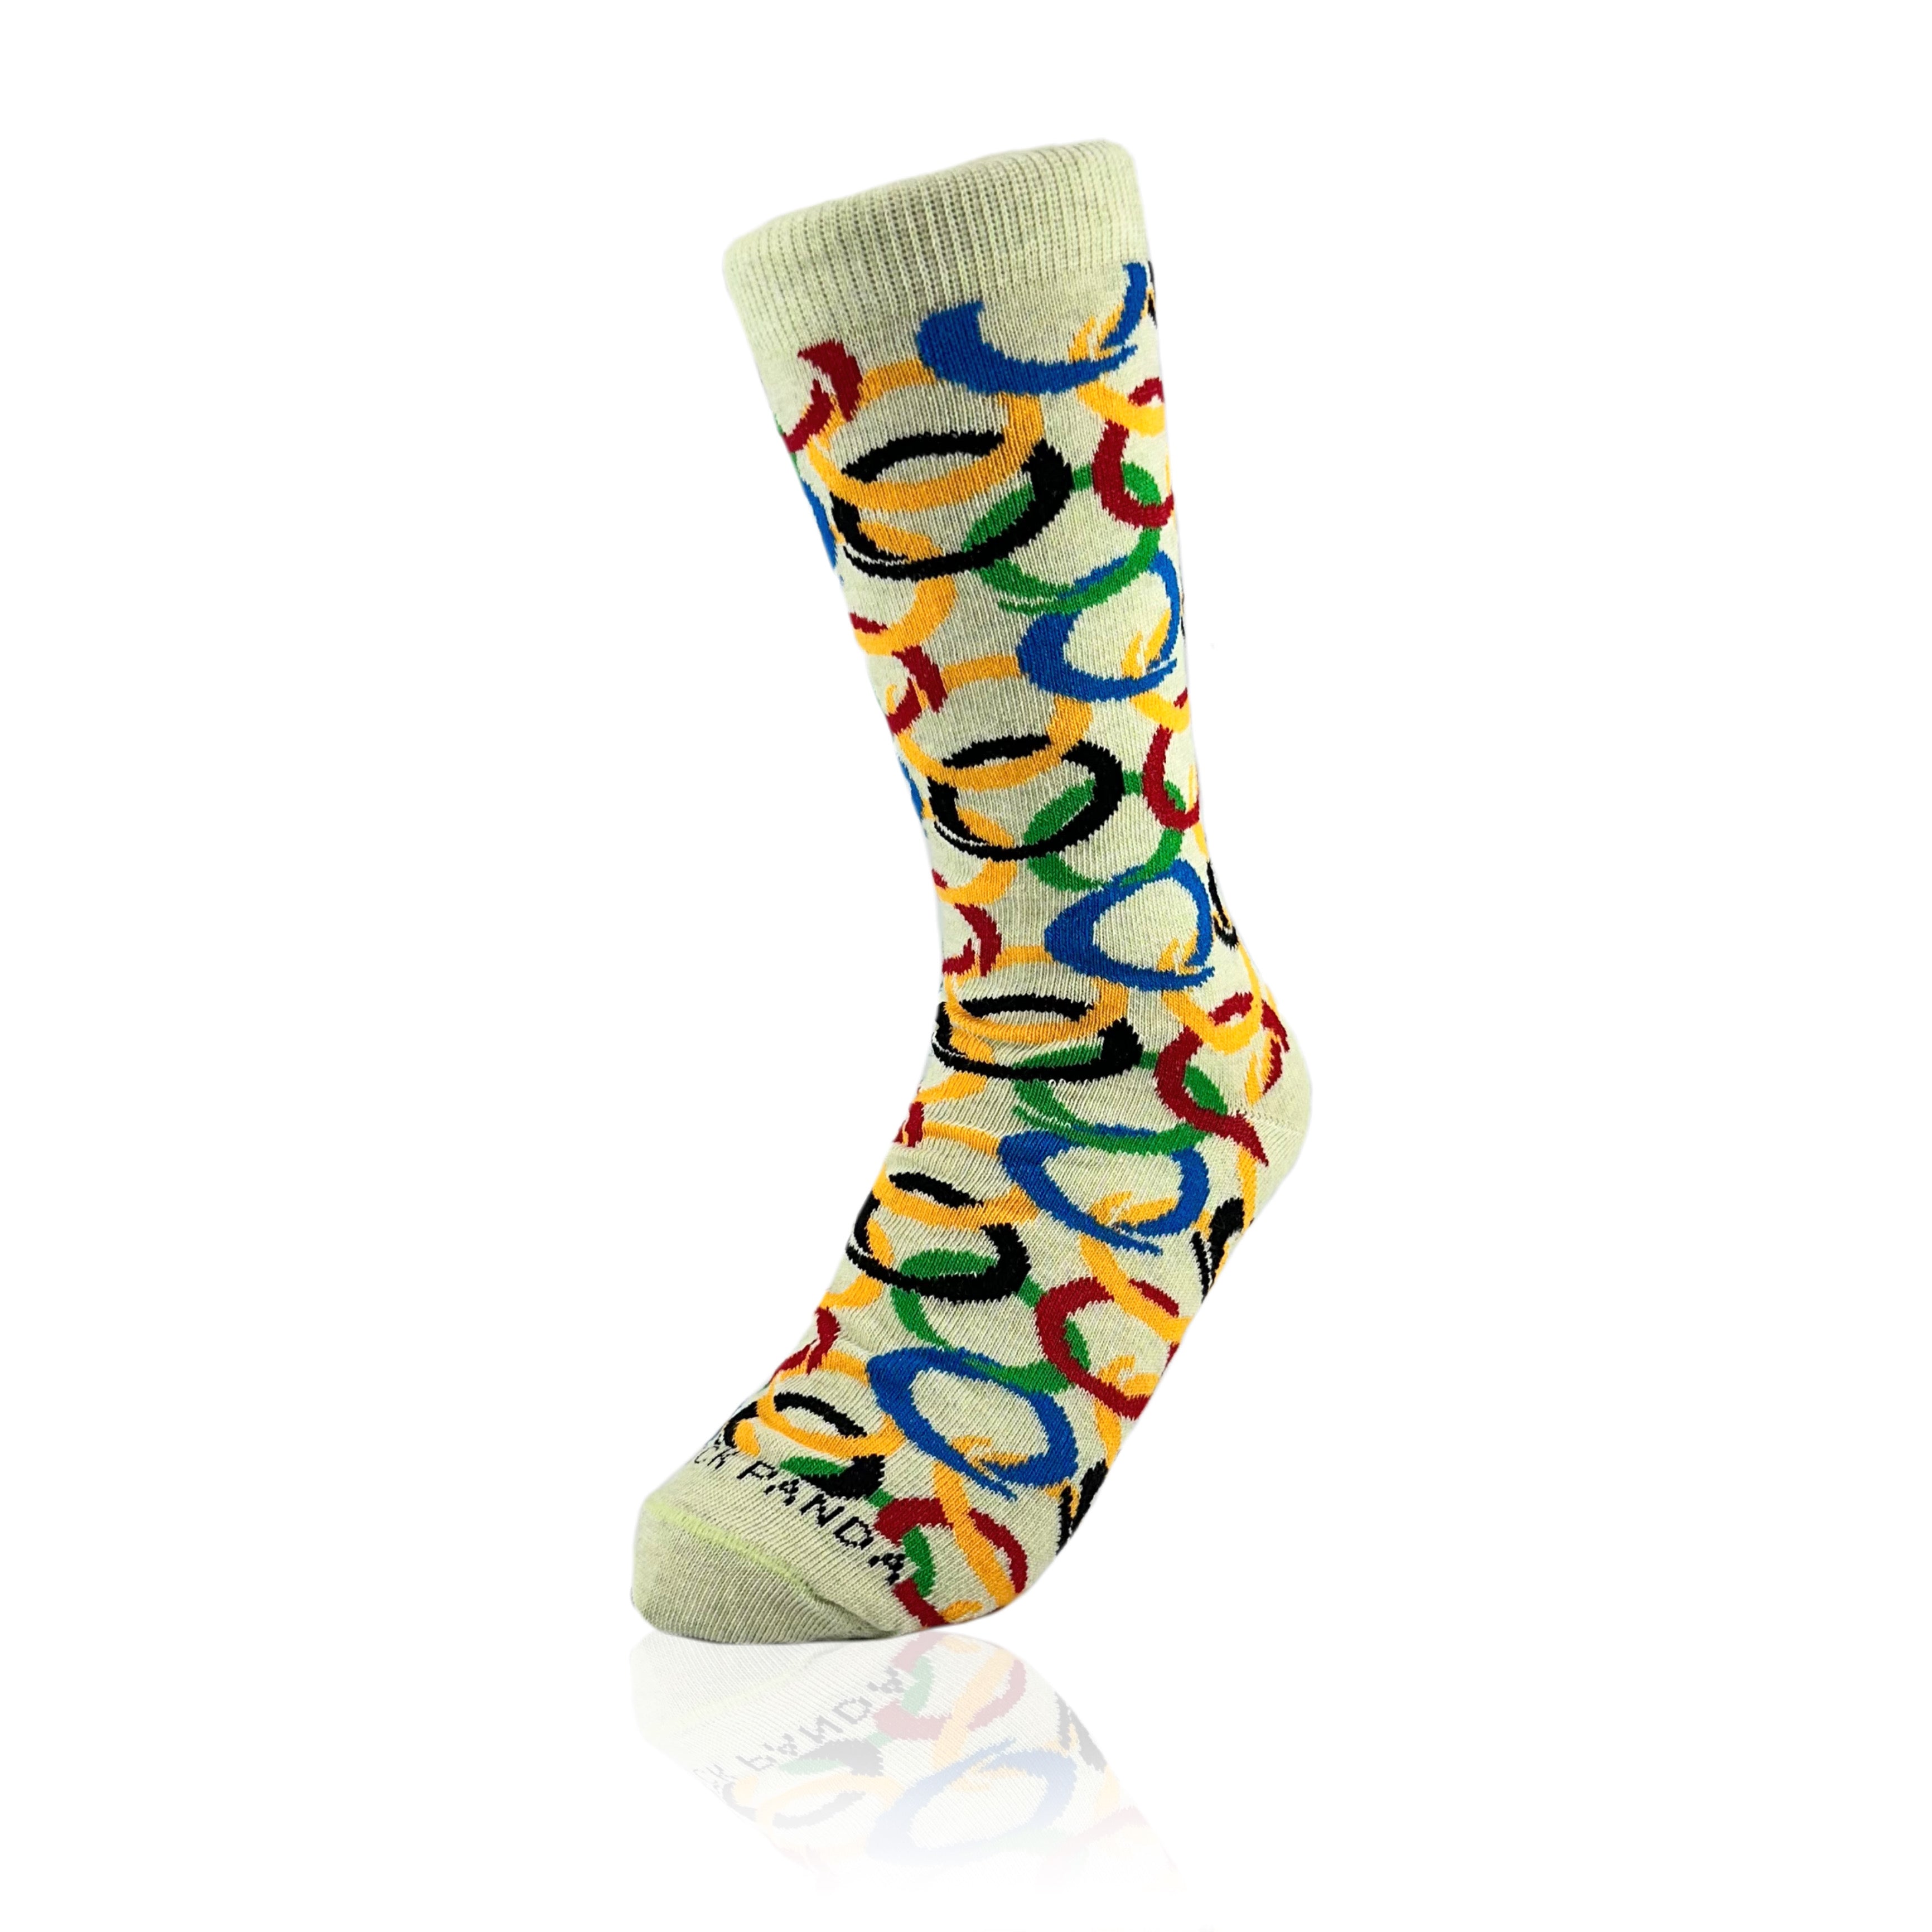 Olympic Ring Pattern Socks from the Sock Panda (Adult Small -  Shoe Sizes 2-5)